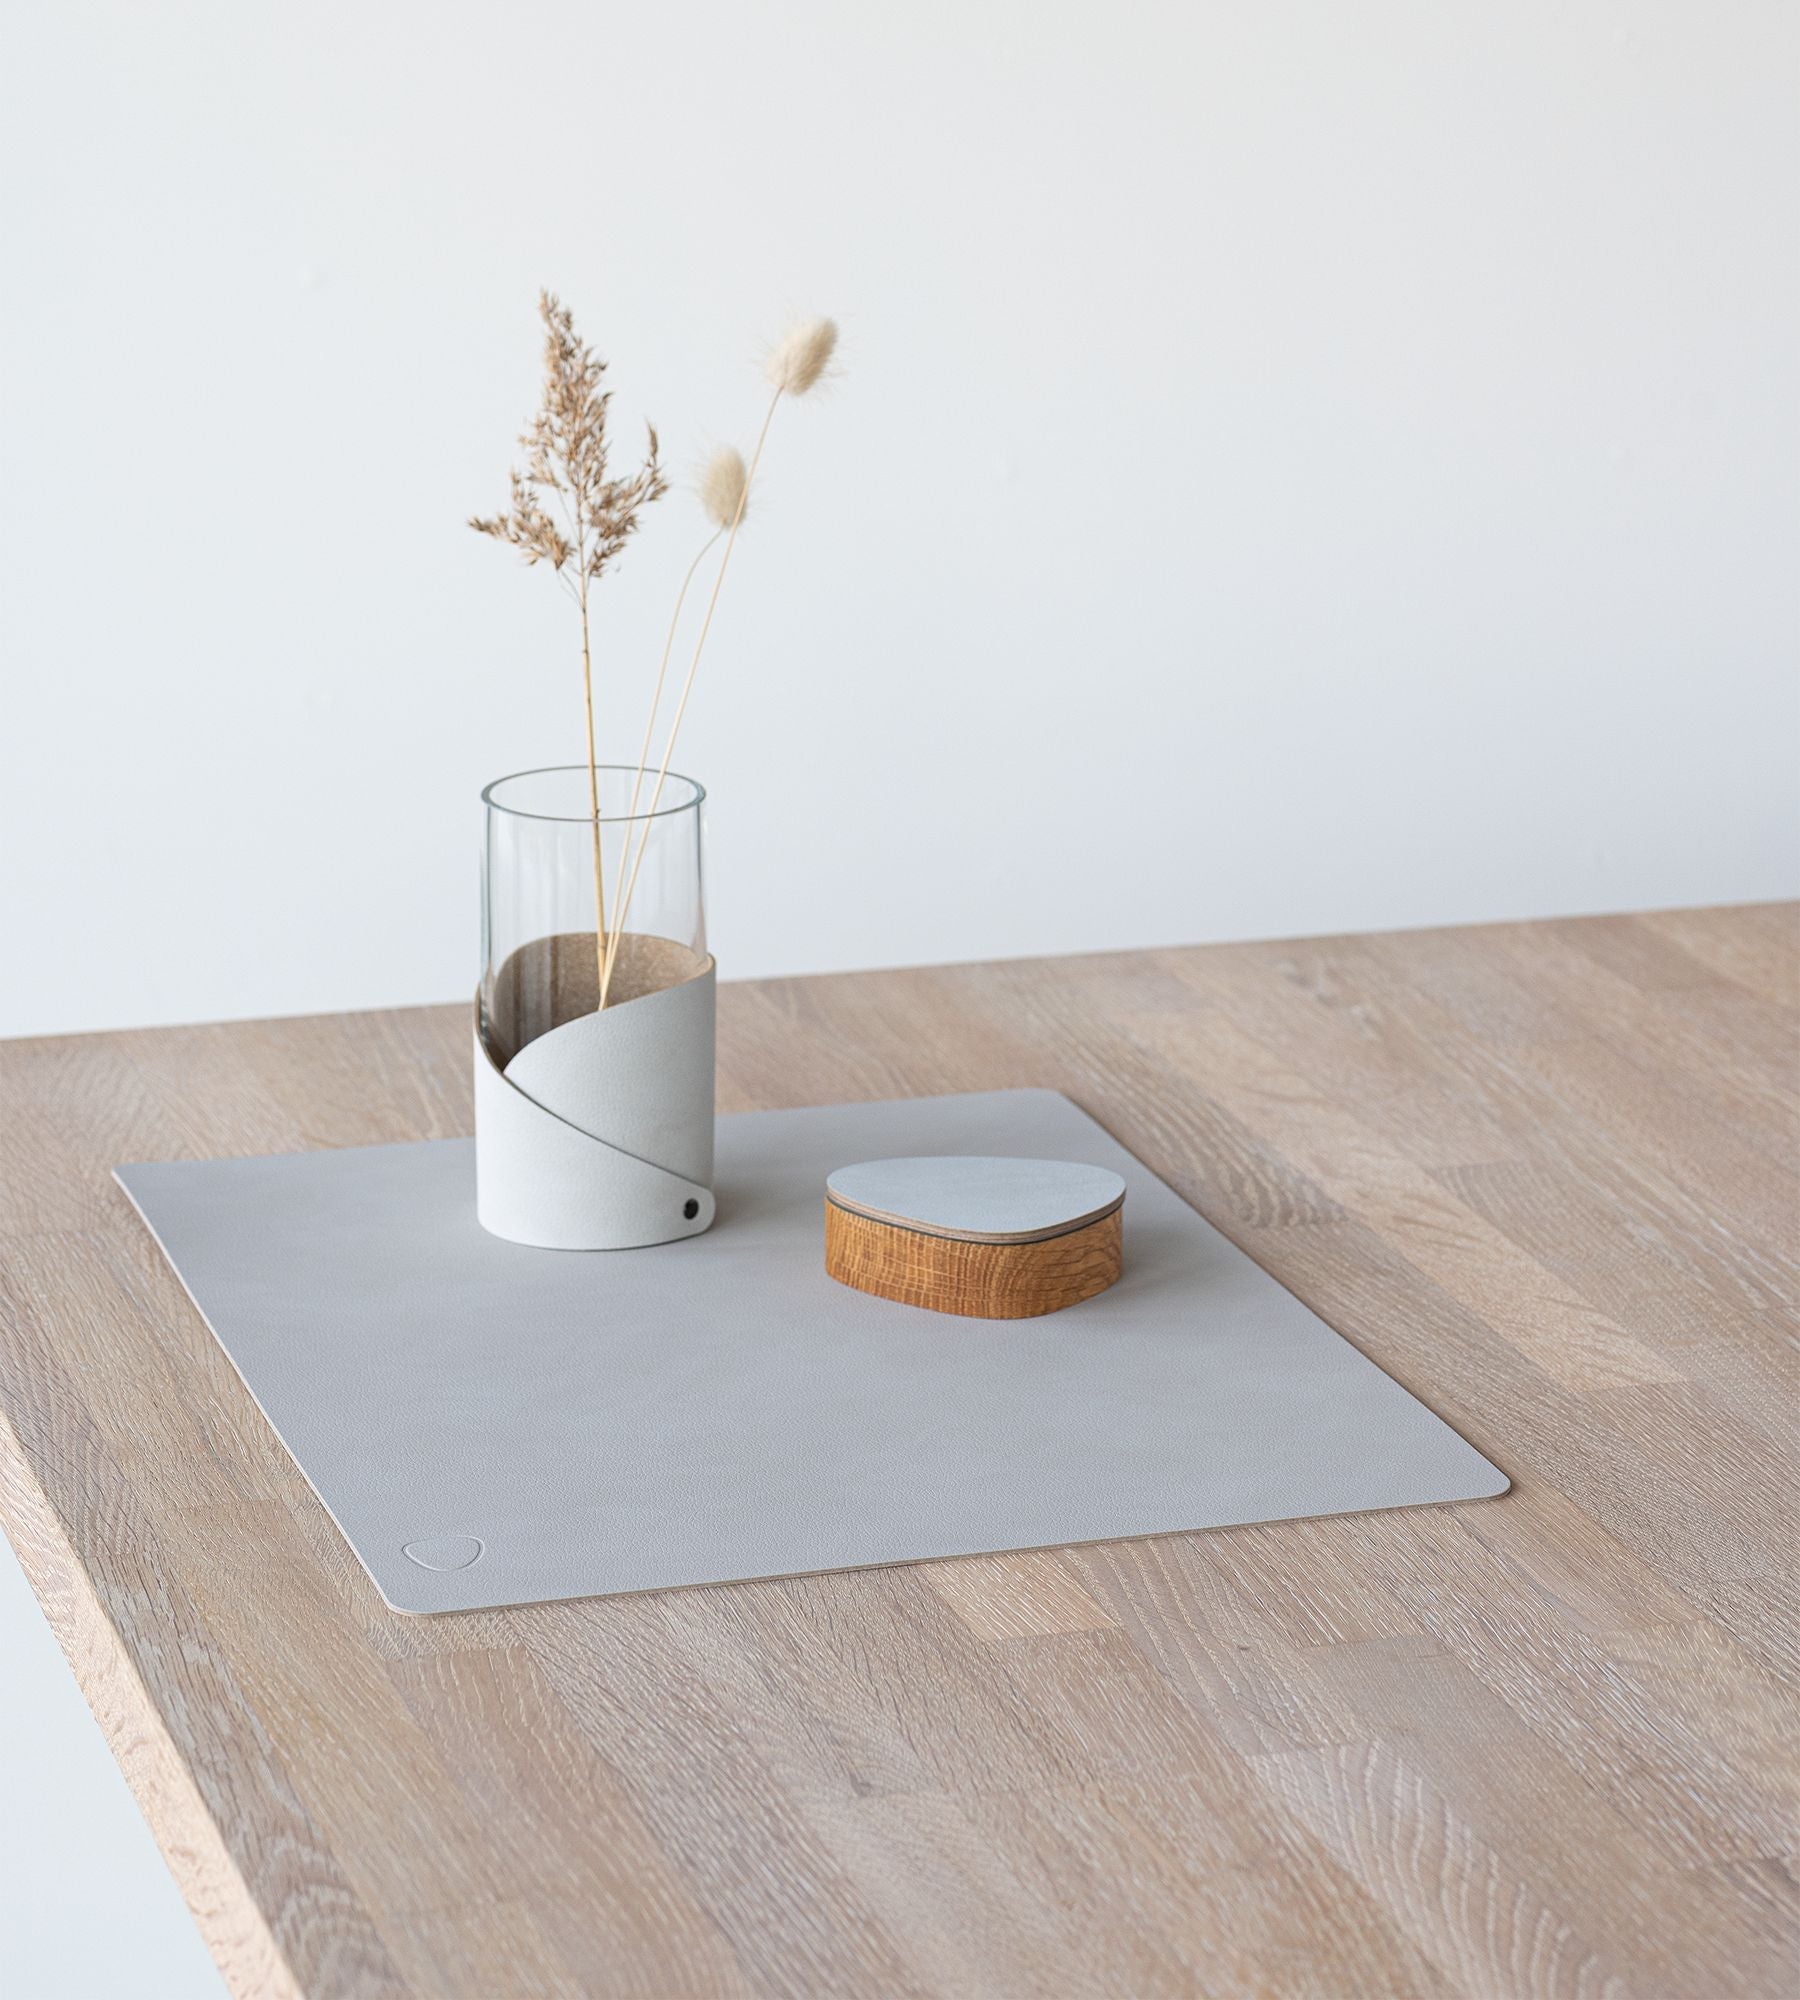 Lind ADN Table Mat Square L, Oyster White